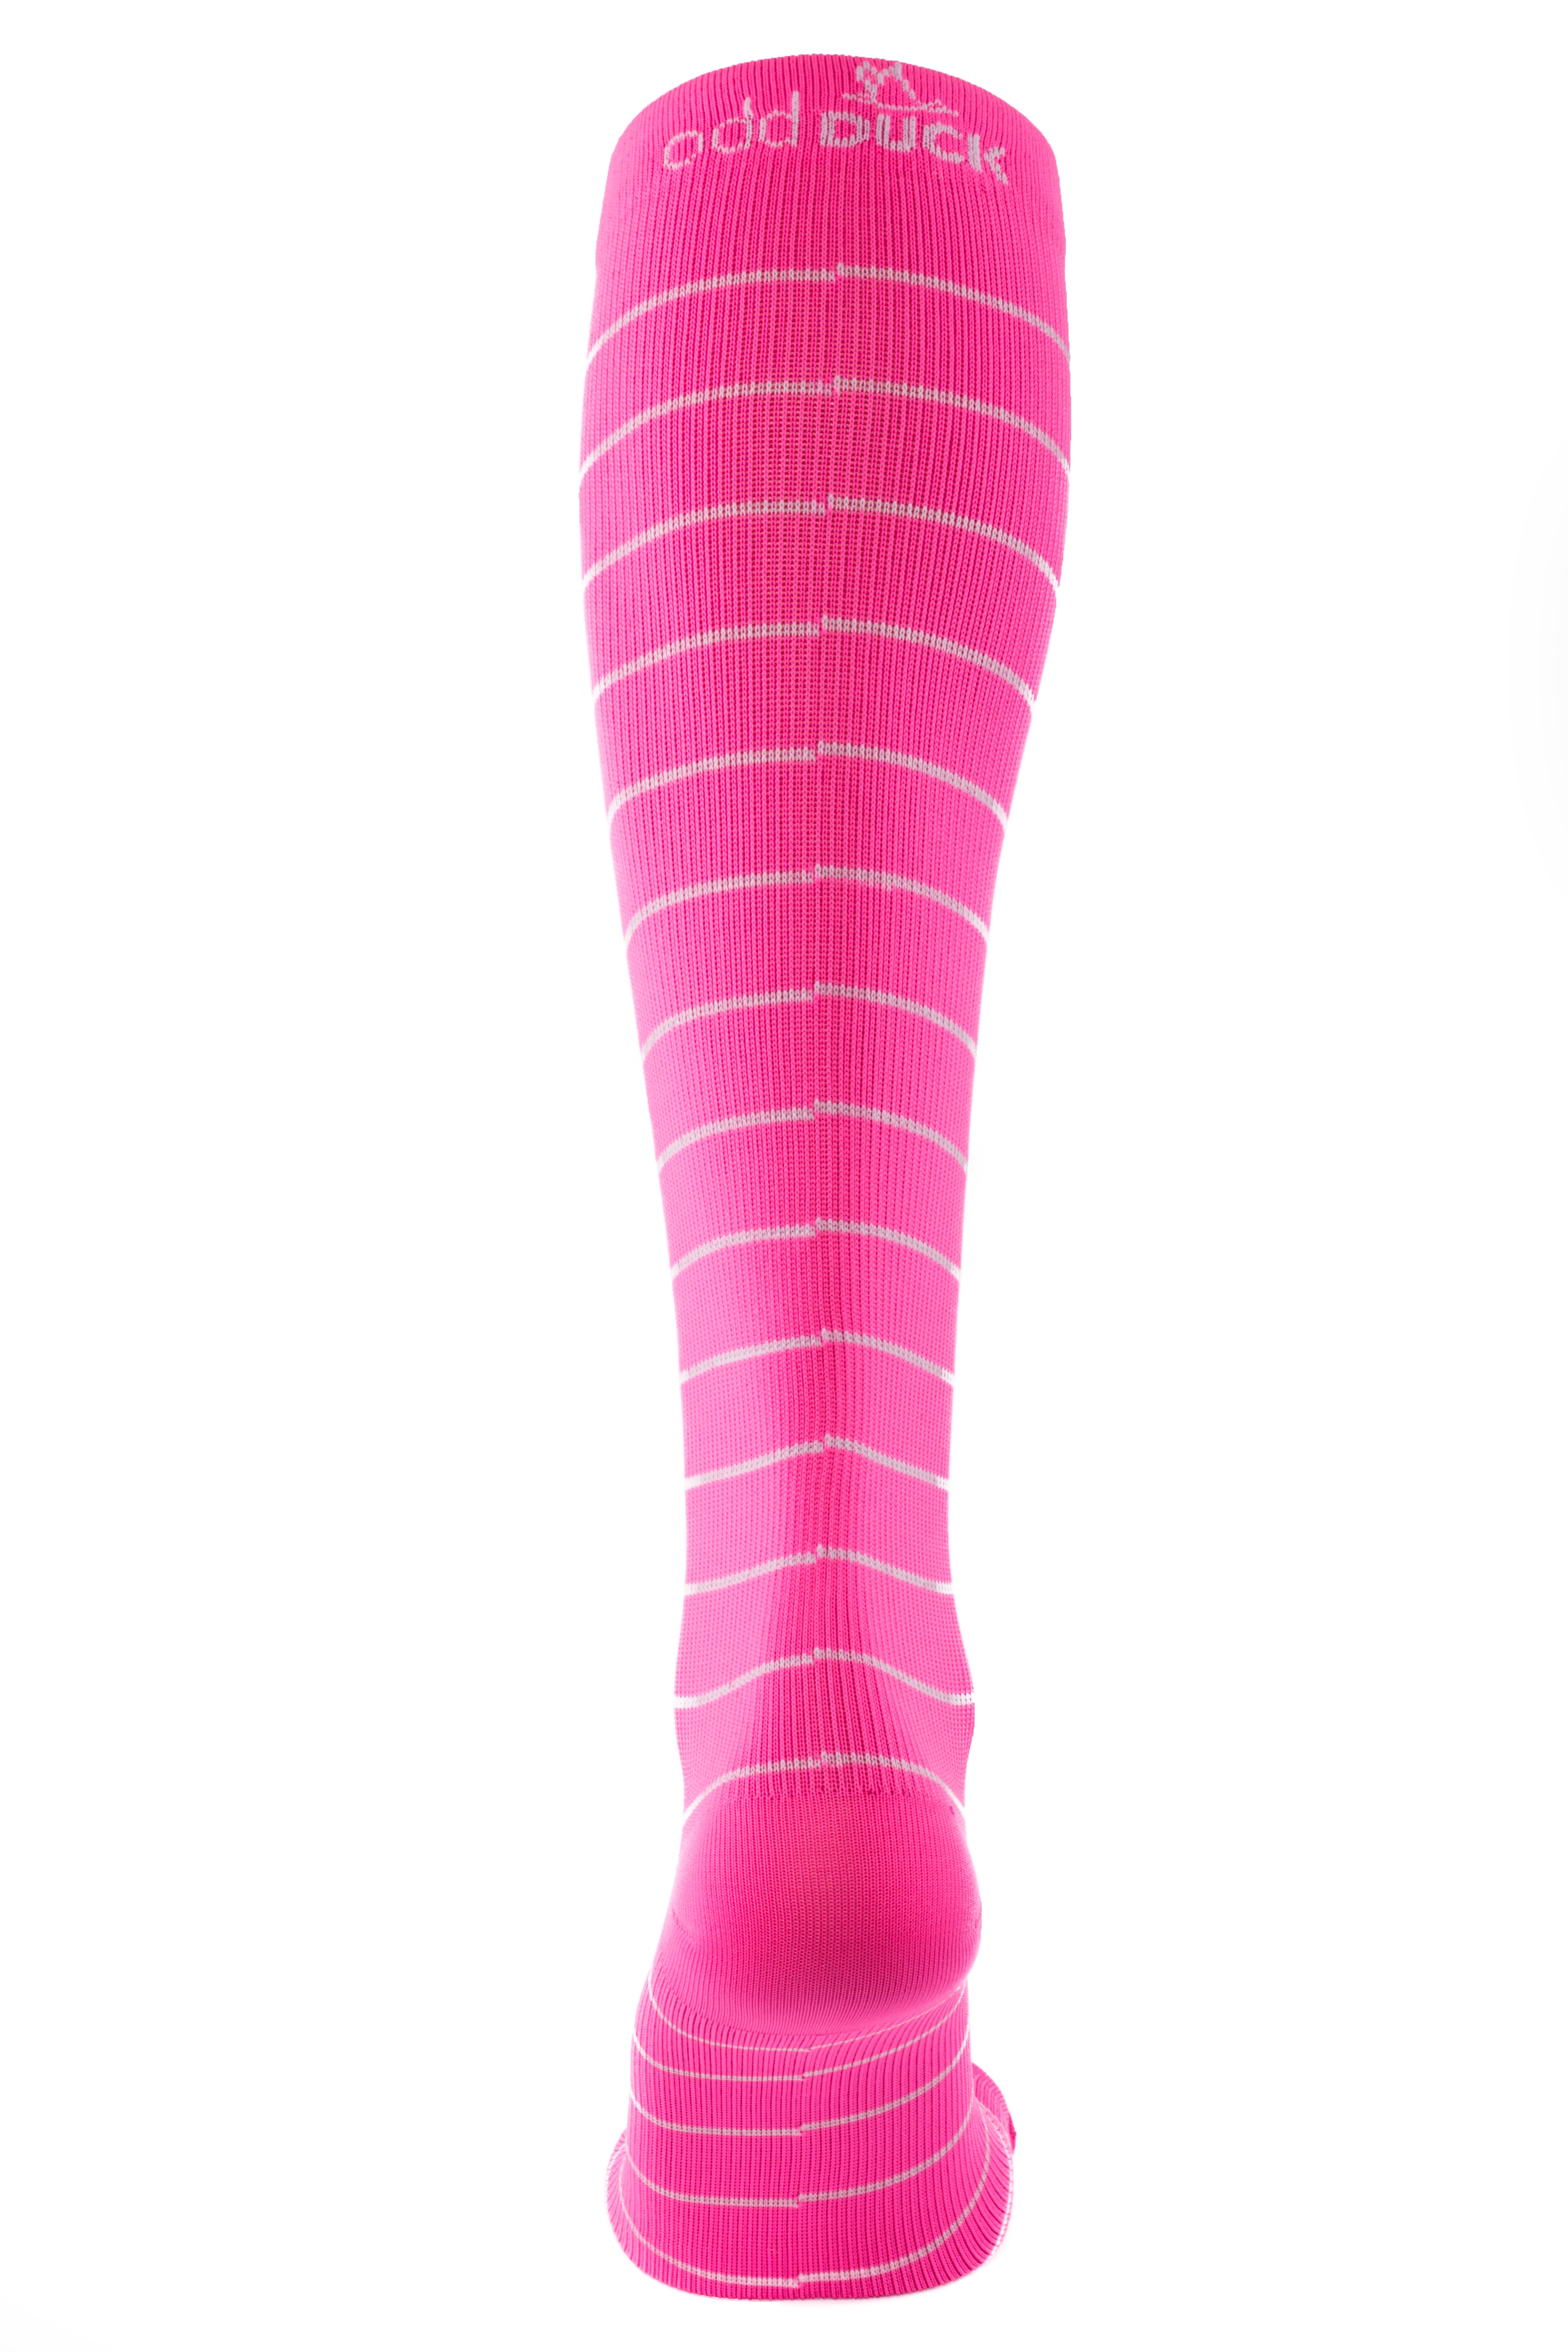 Bright pink compression socks Canada with white horizontal lines. Back view.